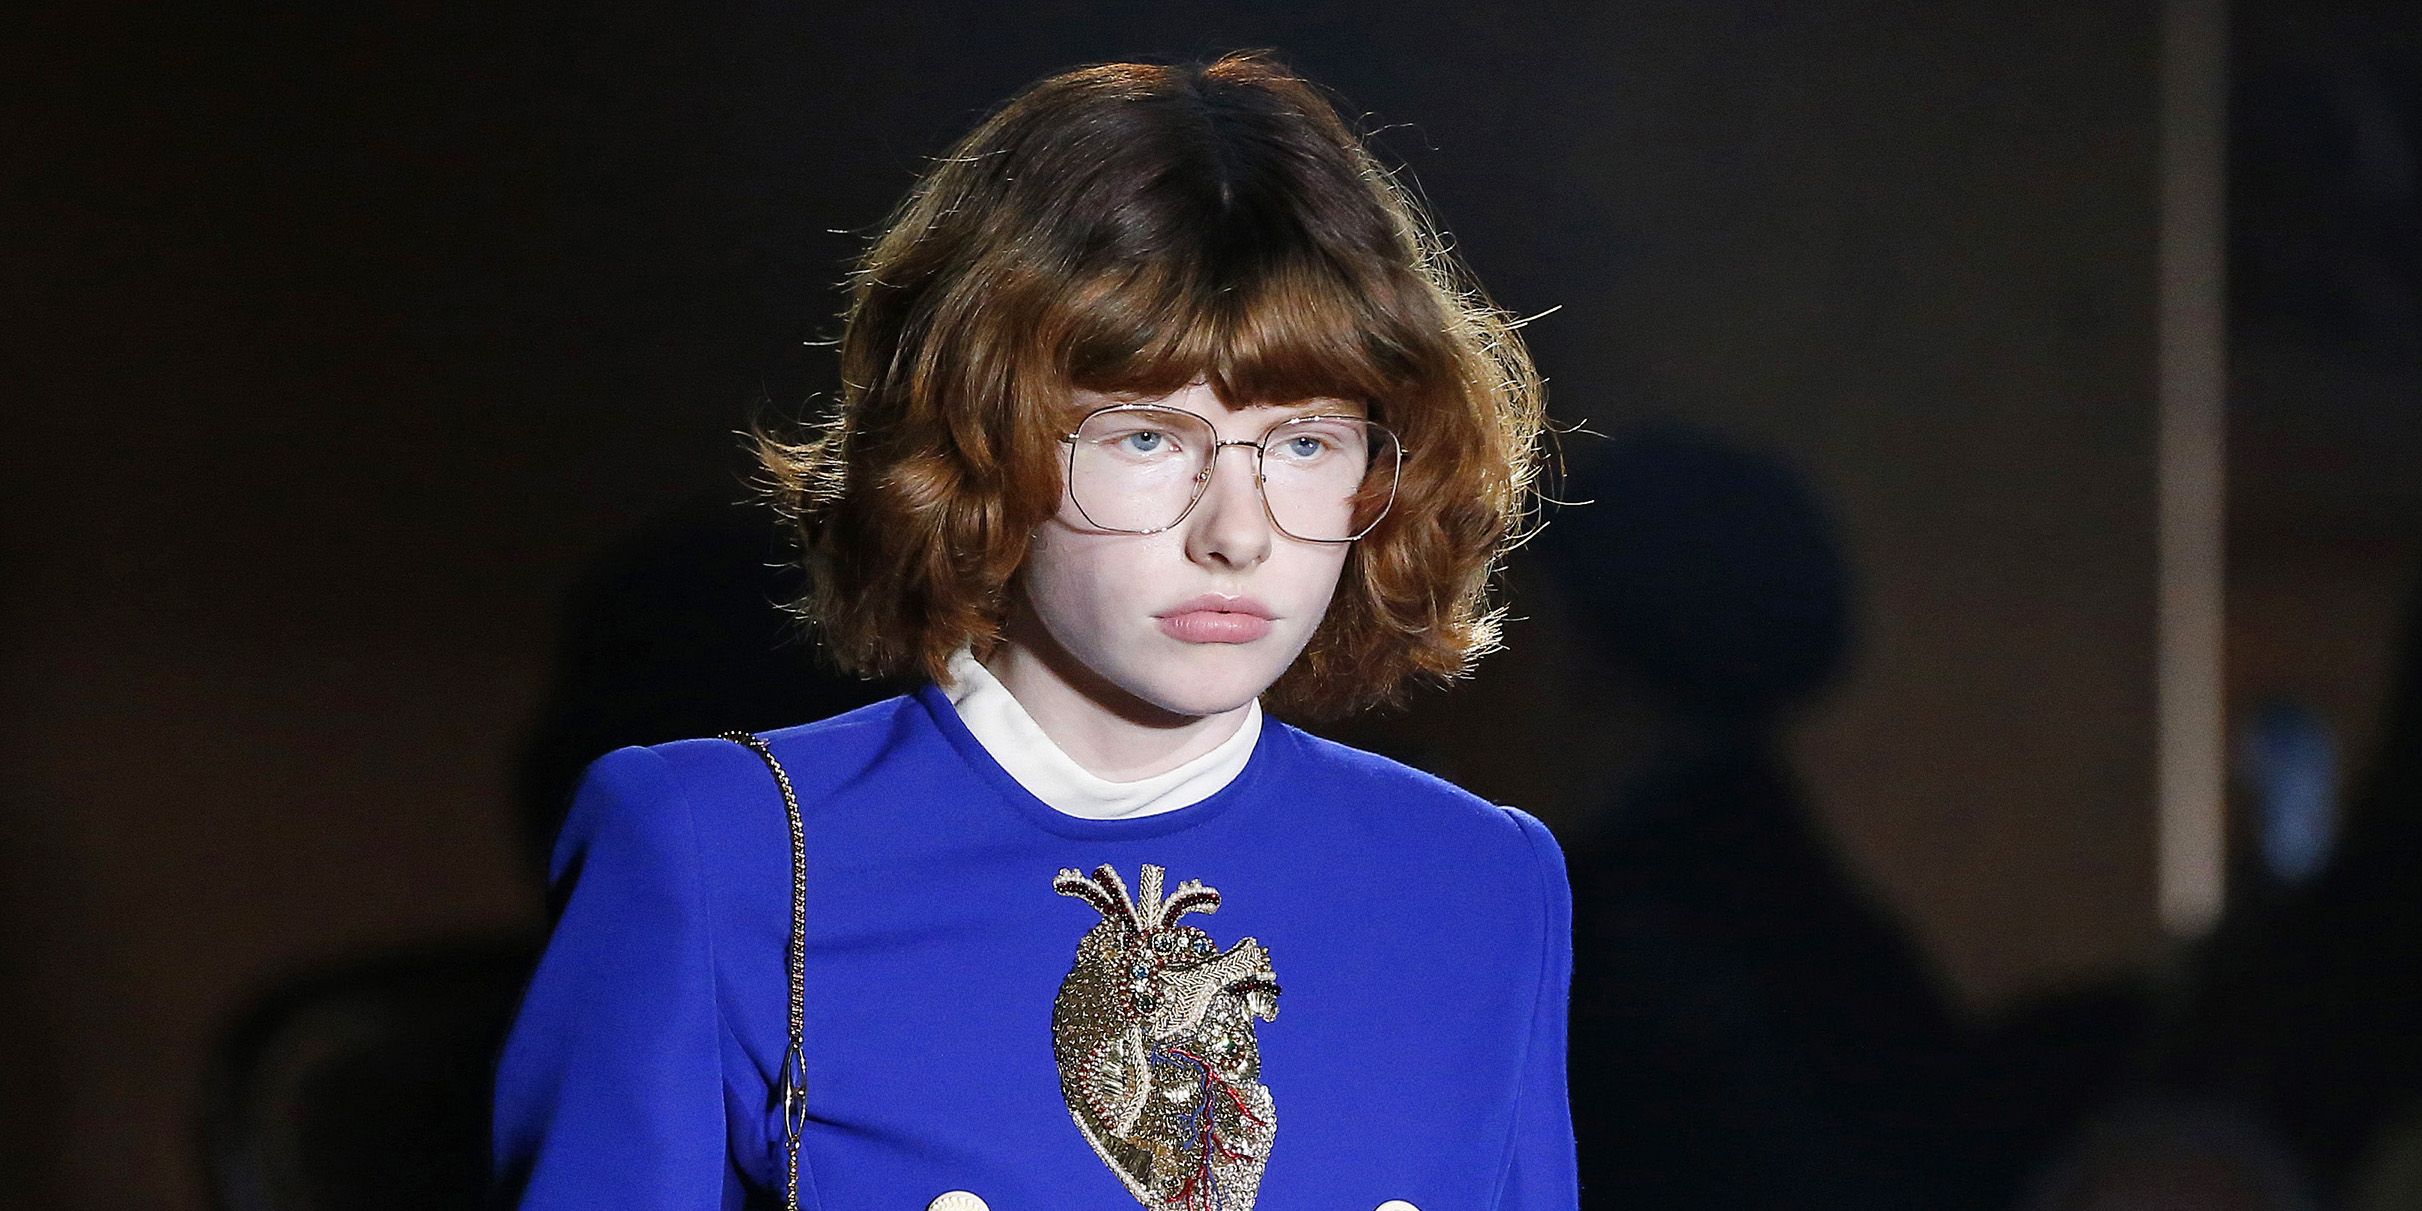 Skinny 90s Brows And Badly Painted Nails Gave Gucci A Teenage Twist